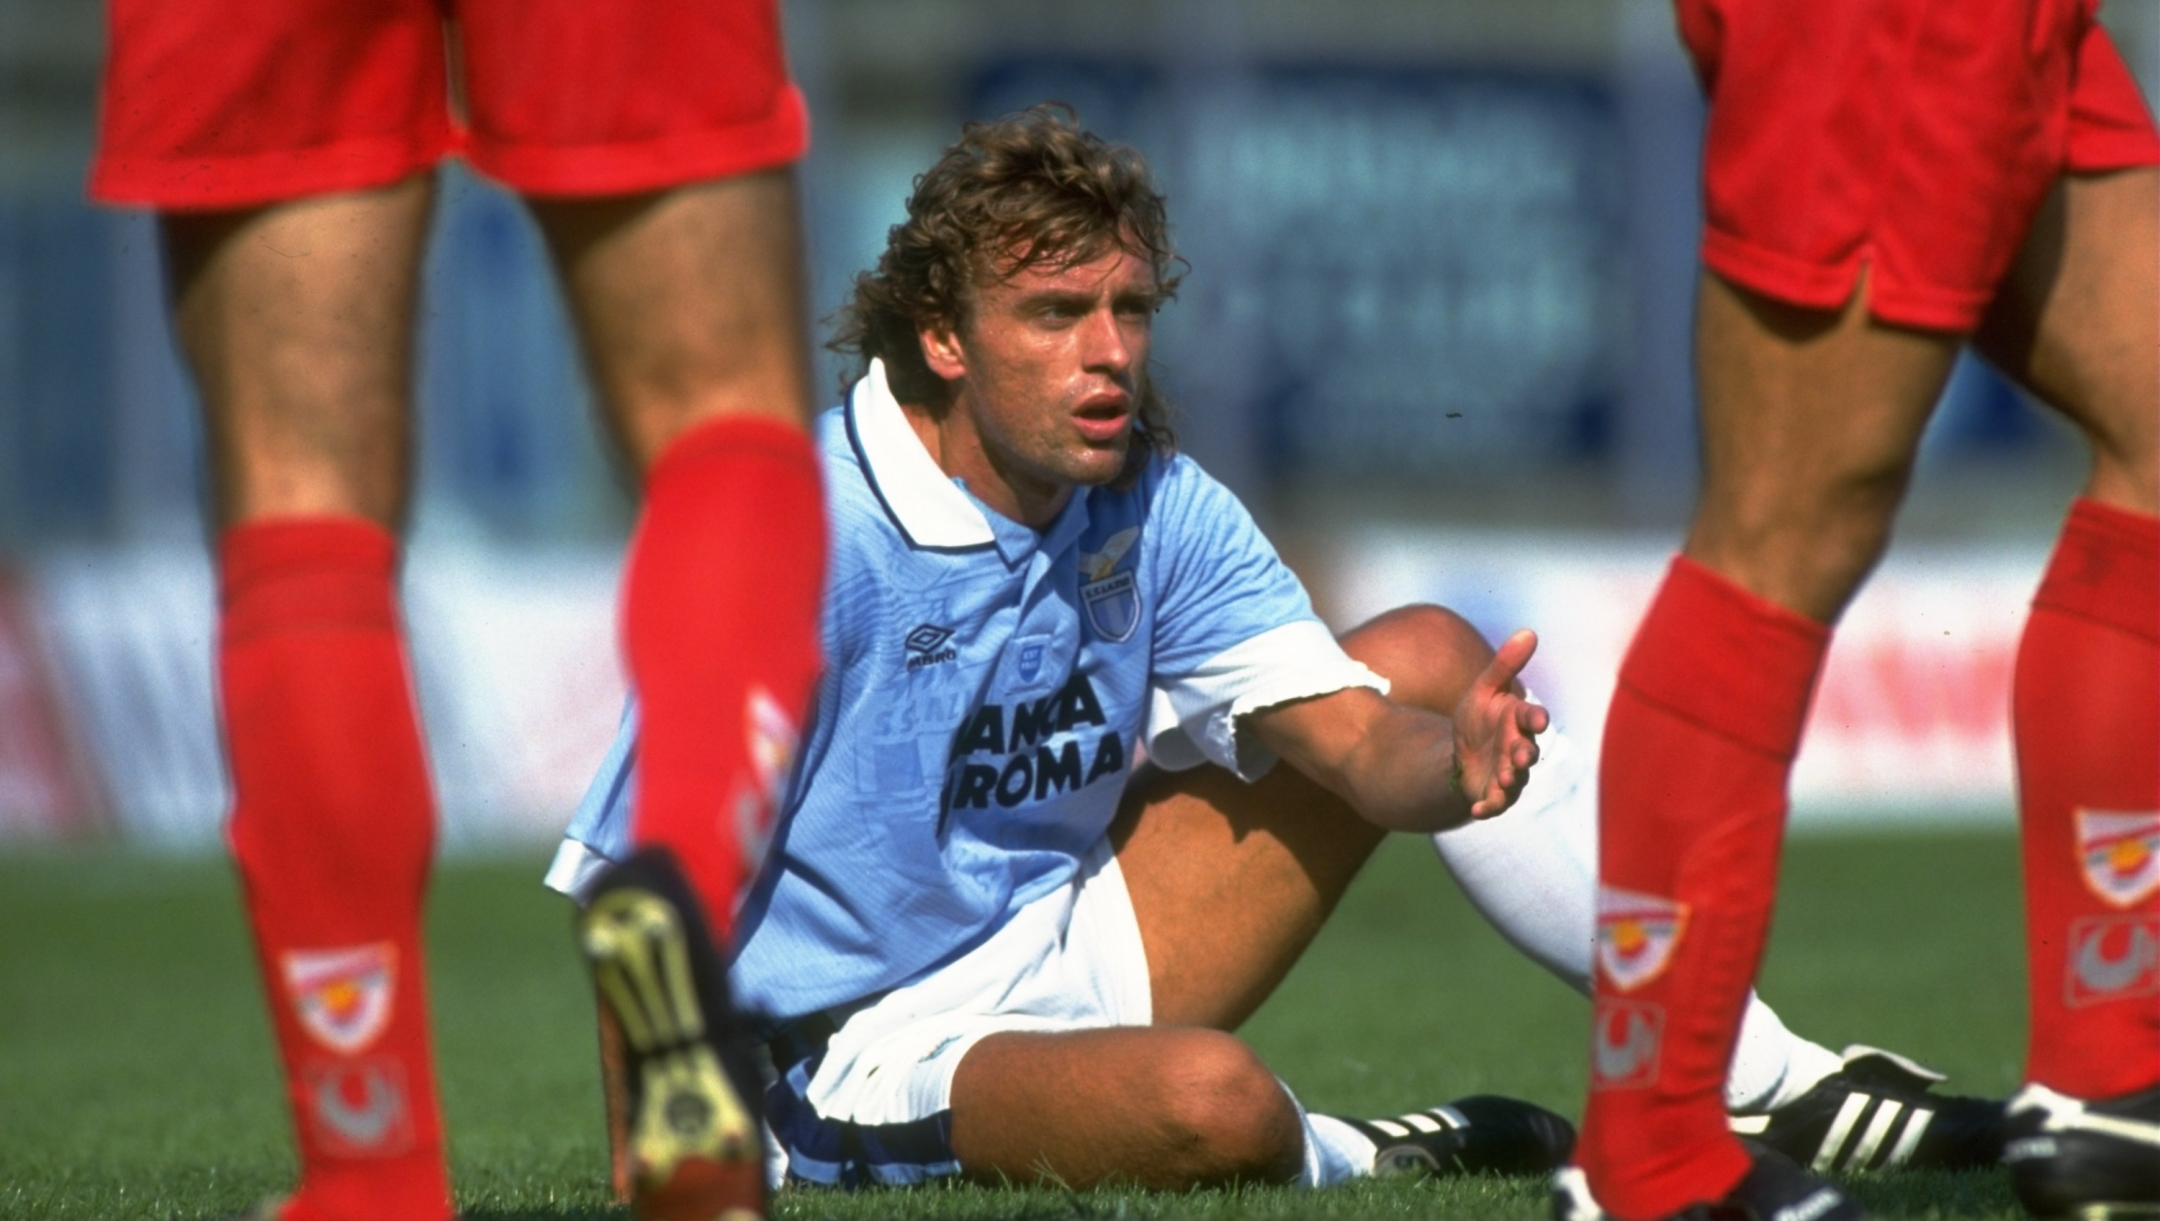 1993:  Thomas Doll of Lazio sits on the pitch during a Serie A match in Italy. \ Mandatory Credit: Clive  Brunskill/Allsport